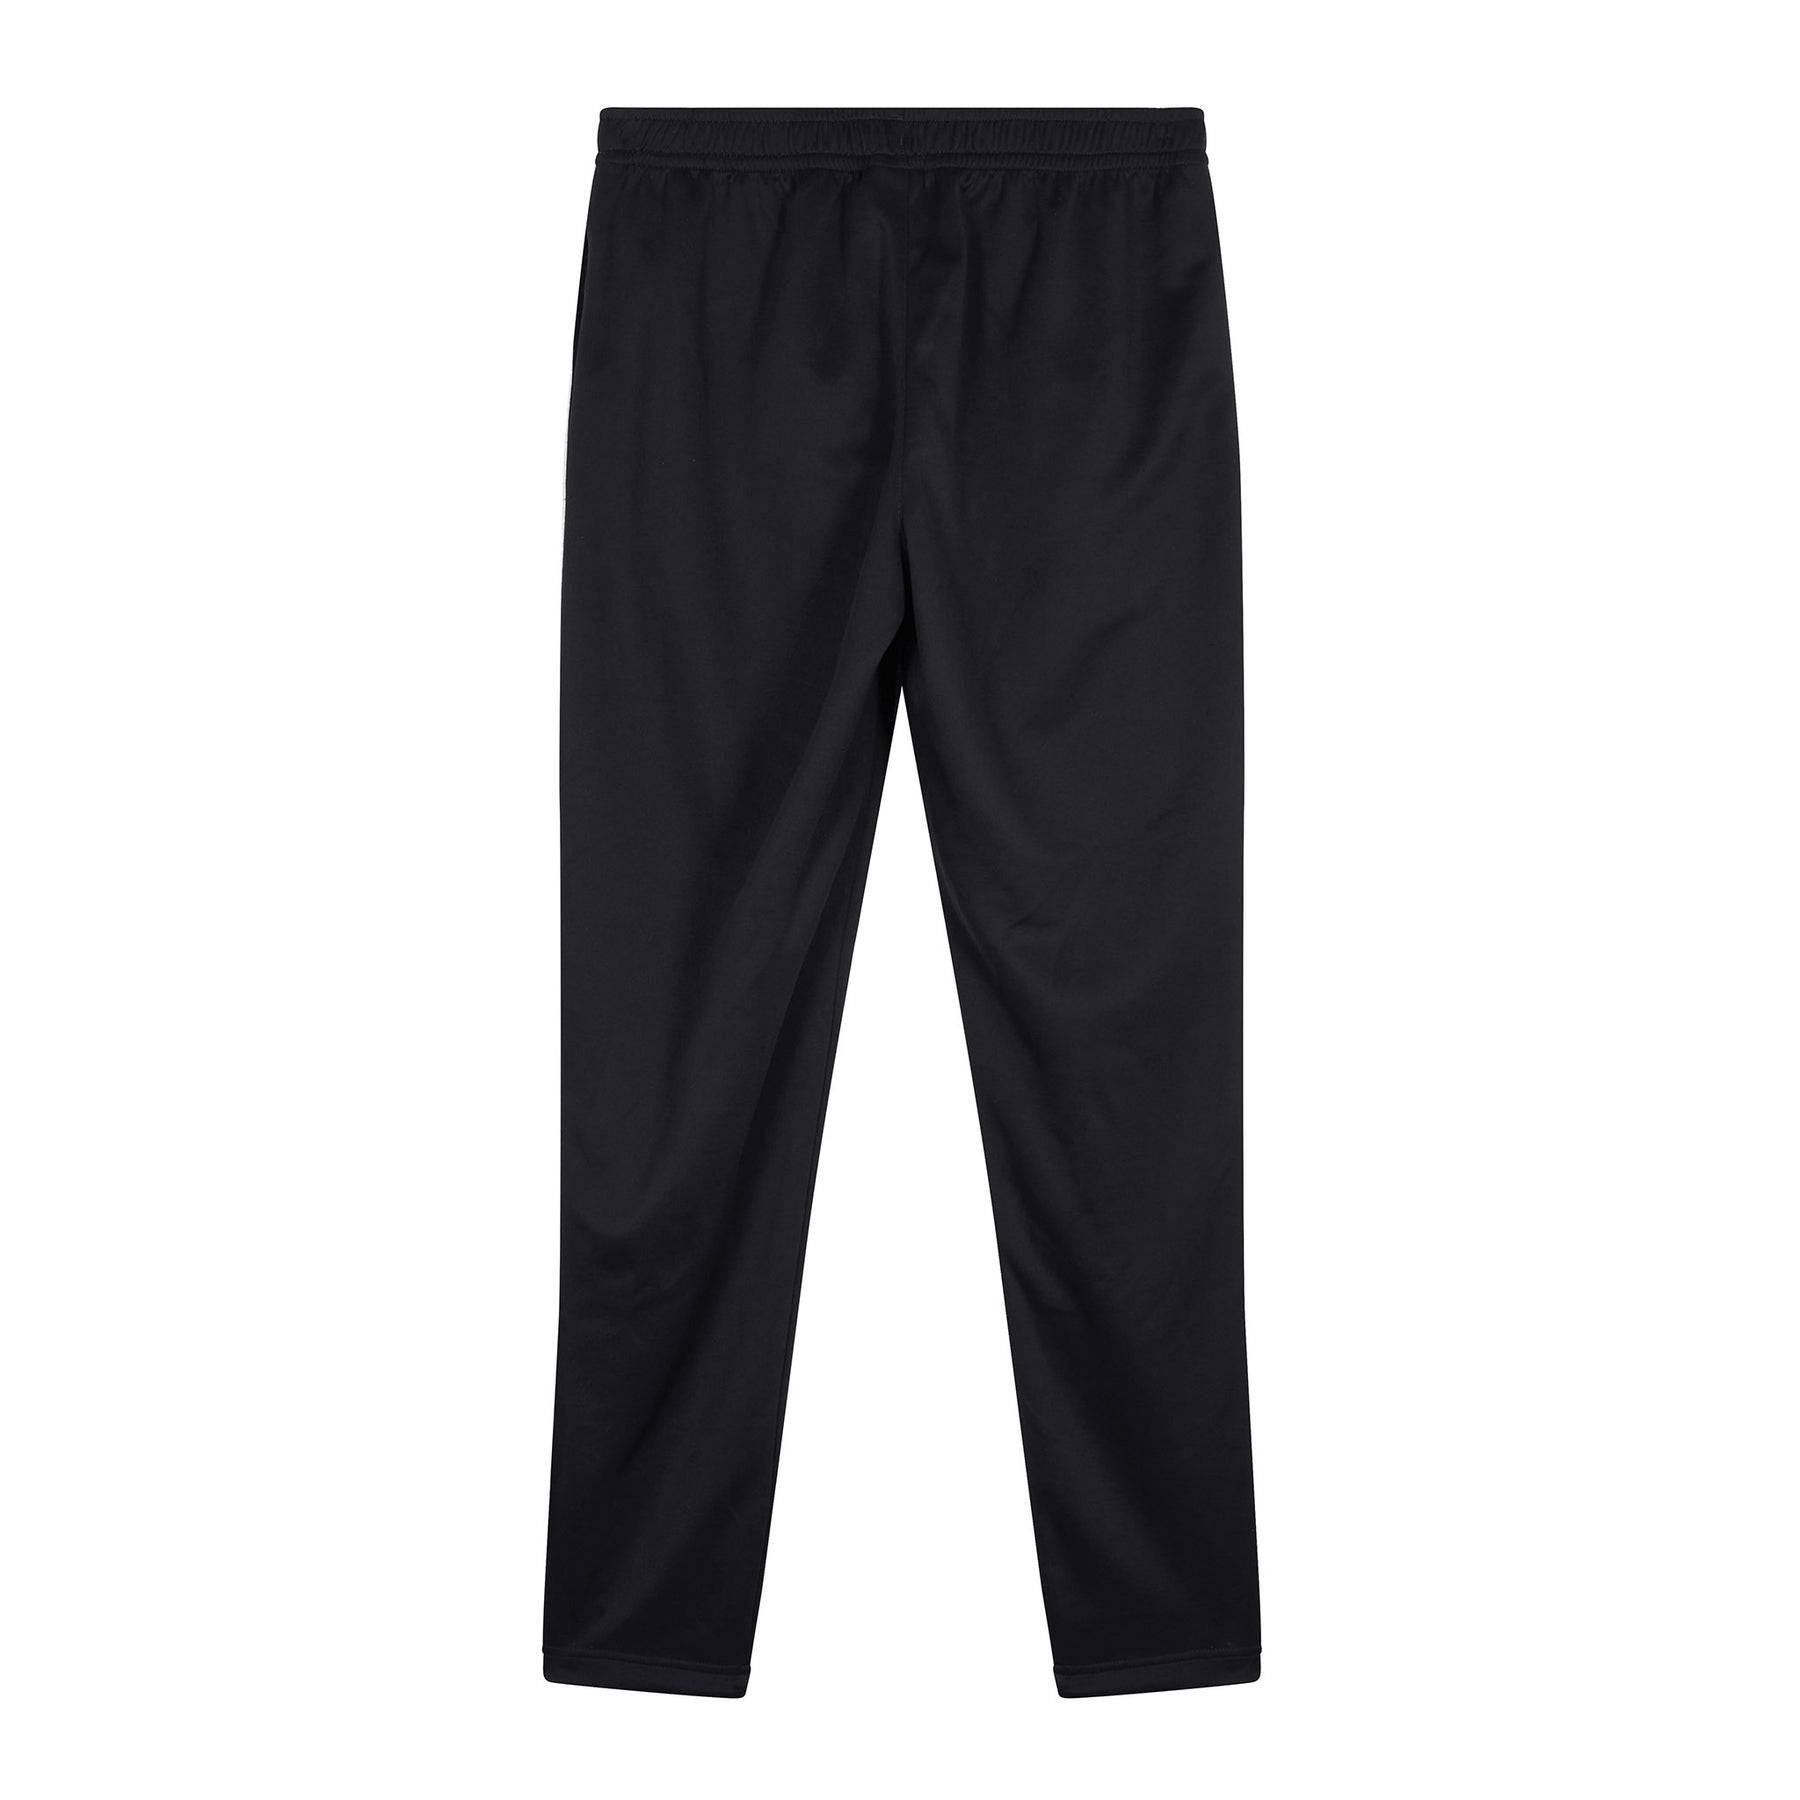 Marlow RFC Men's Tapered Stretch Pant